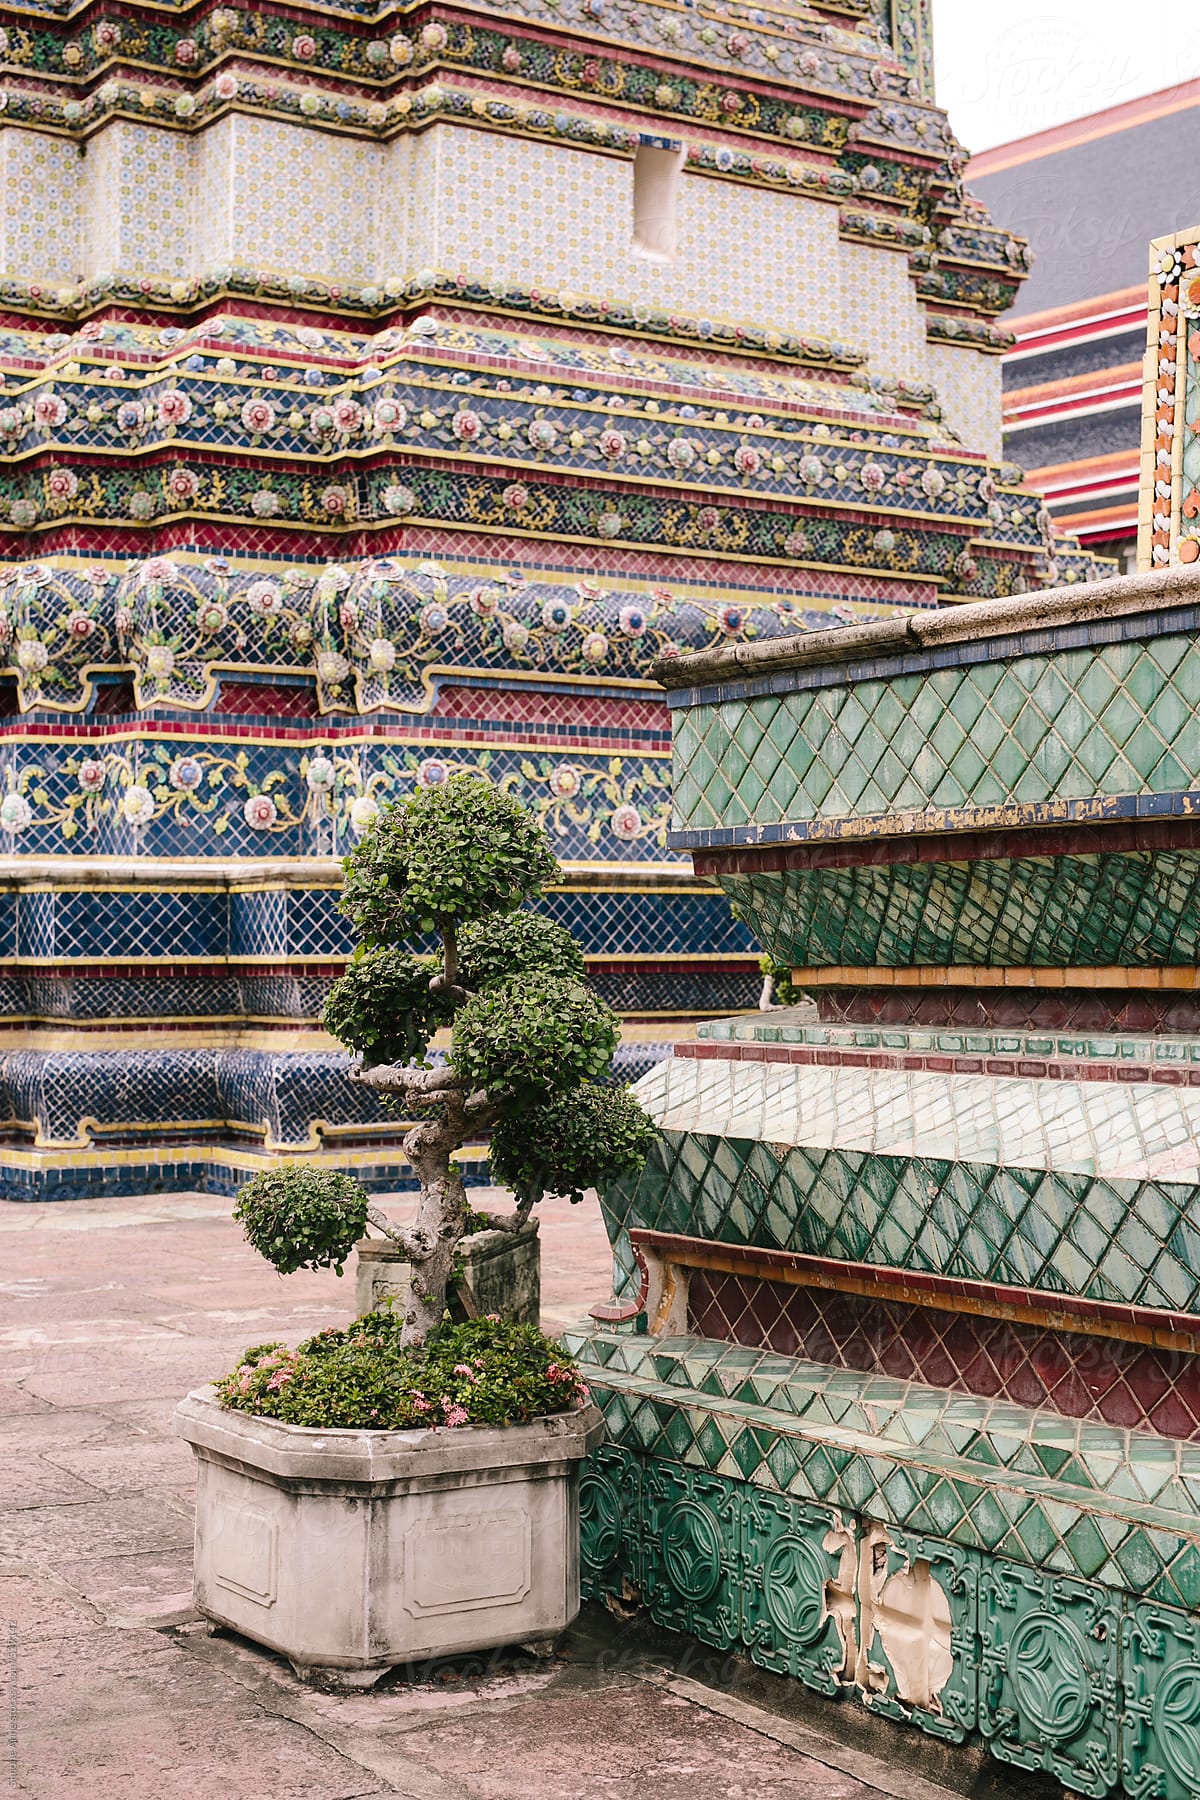 Thai temple with colorful tiles